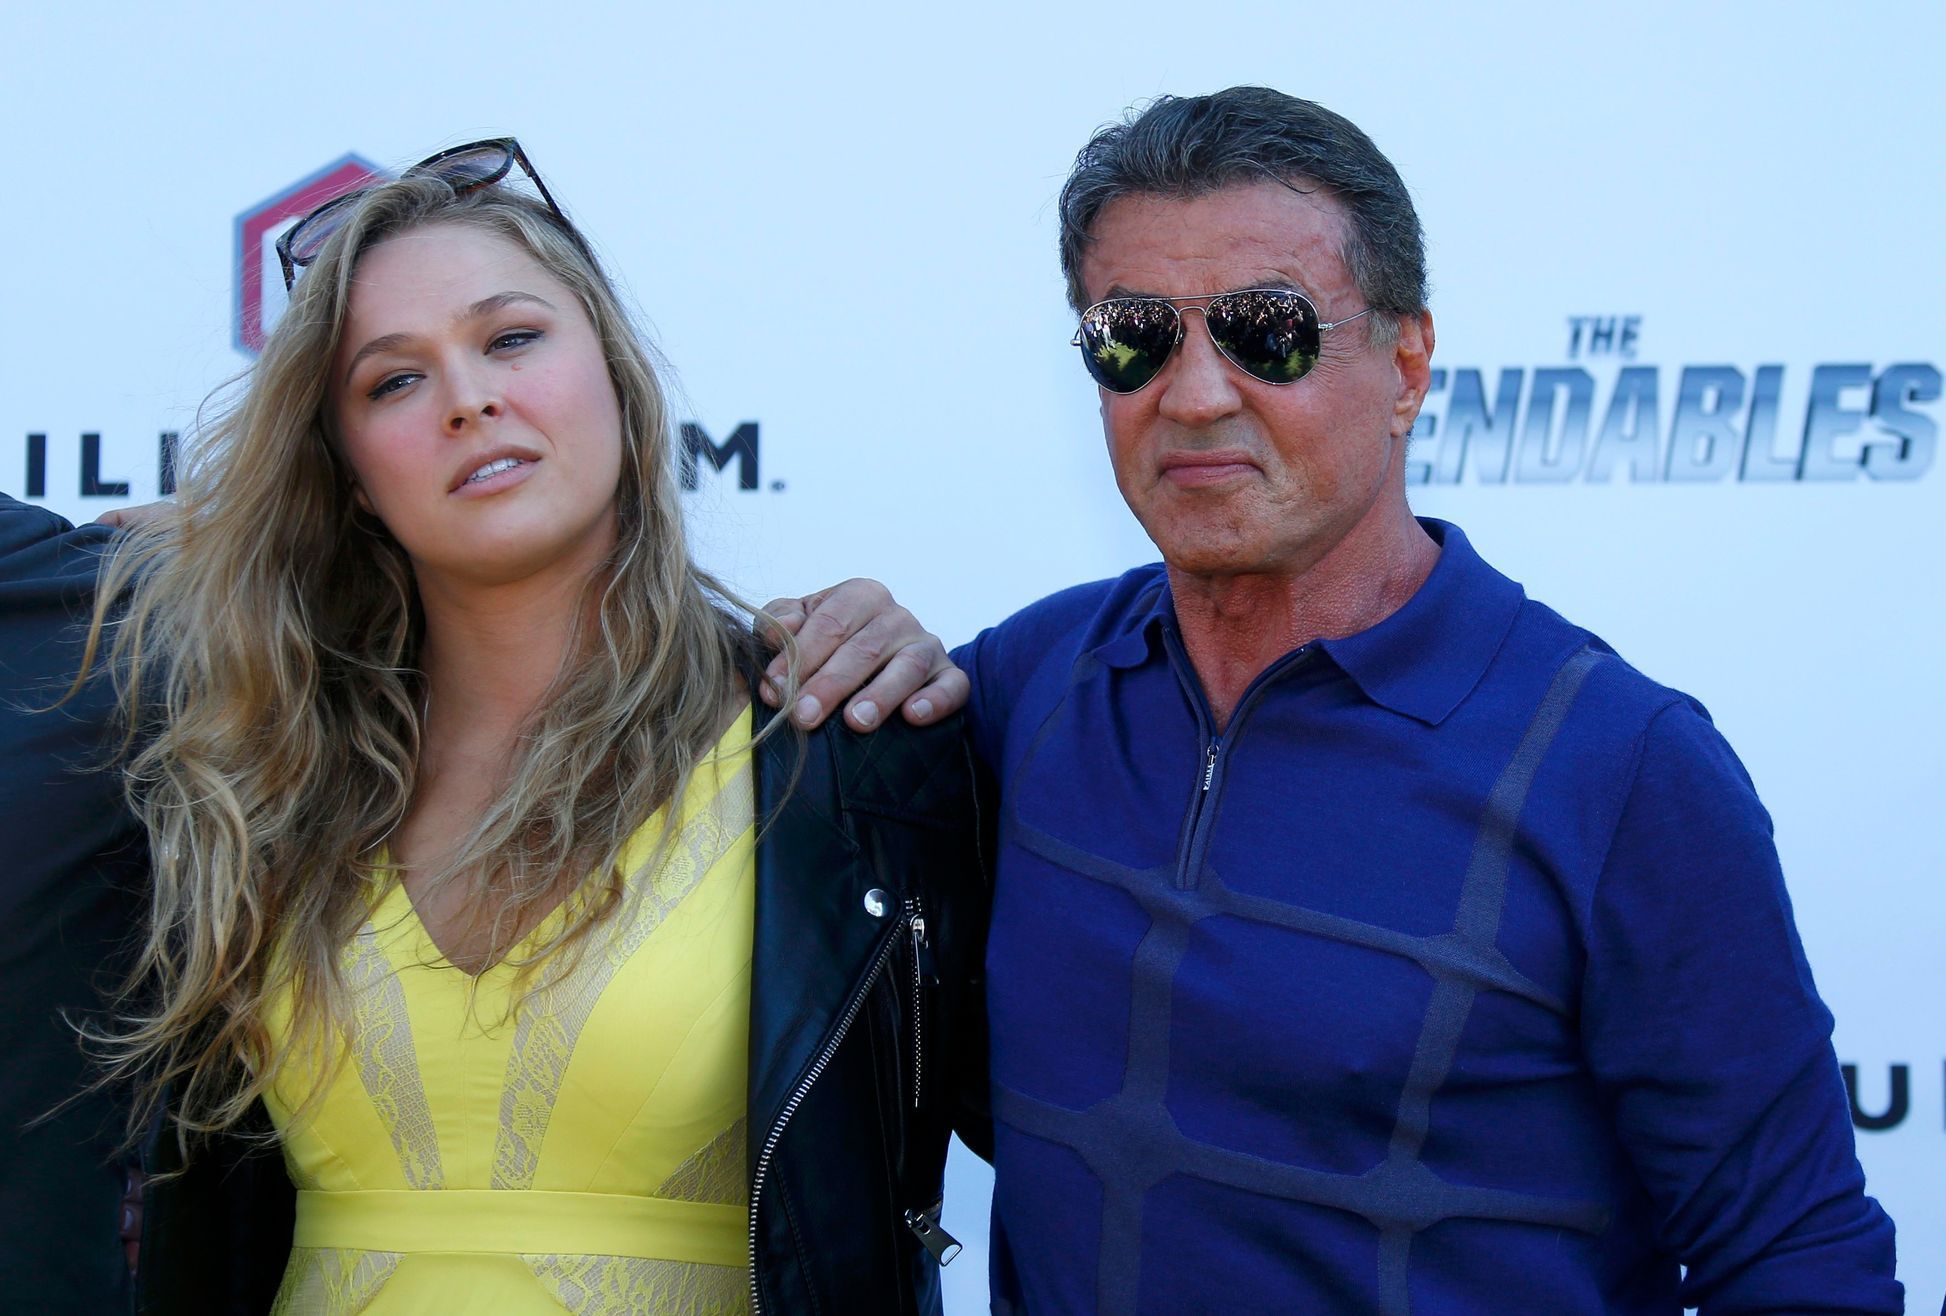 Cast members Ronda Rousey and Sylvester Stallone pose during a photocall on the Croisette to promote the film &quot;The Expendables 3&quot; during the 67th Cannes Film Festival in Cannes